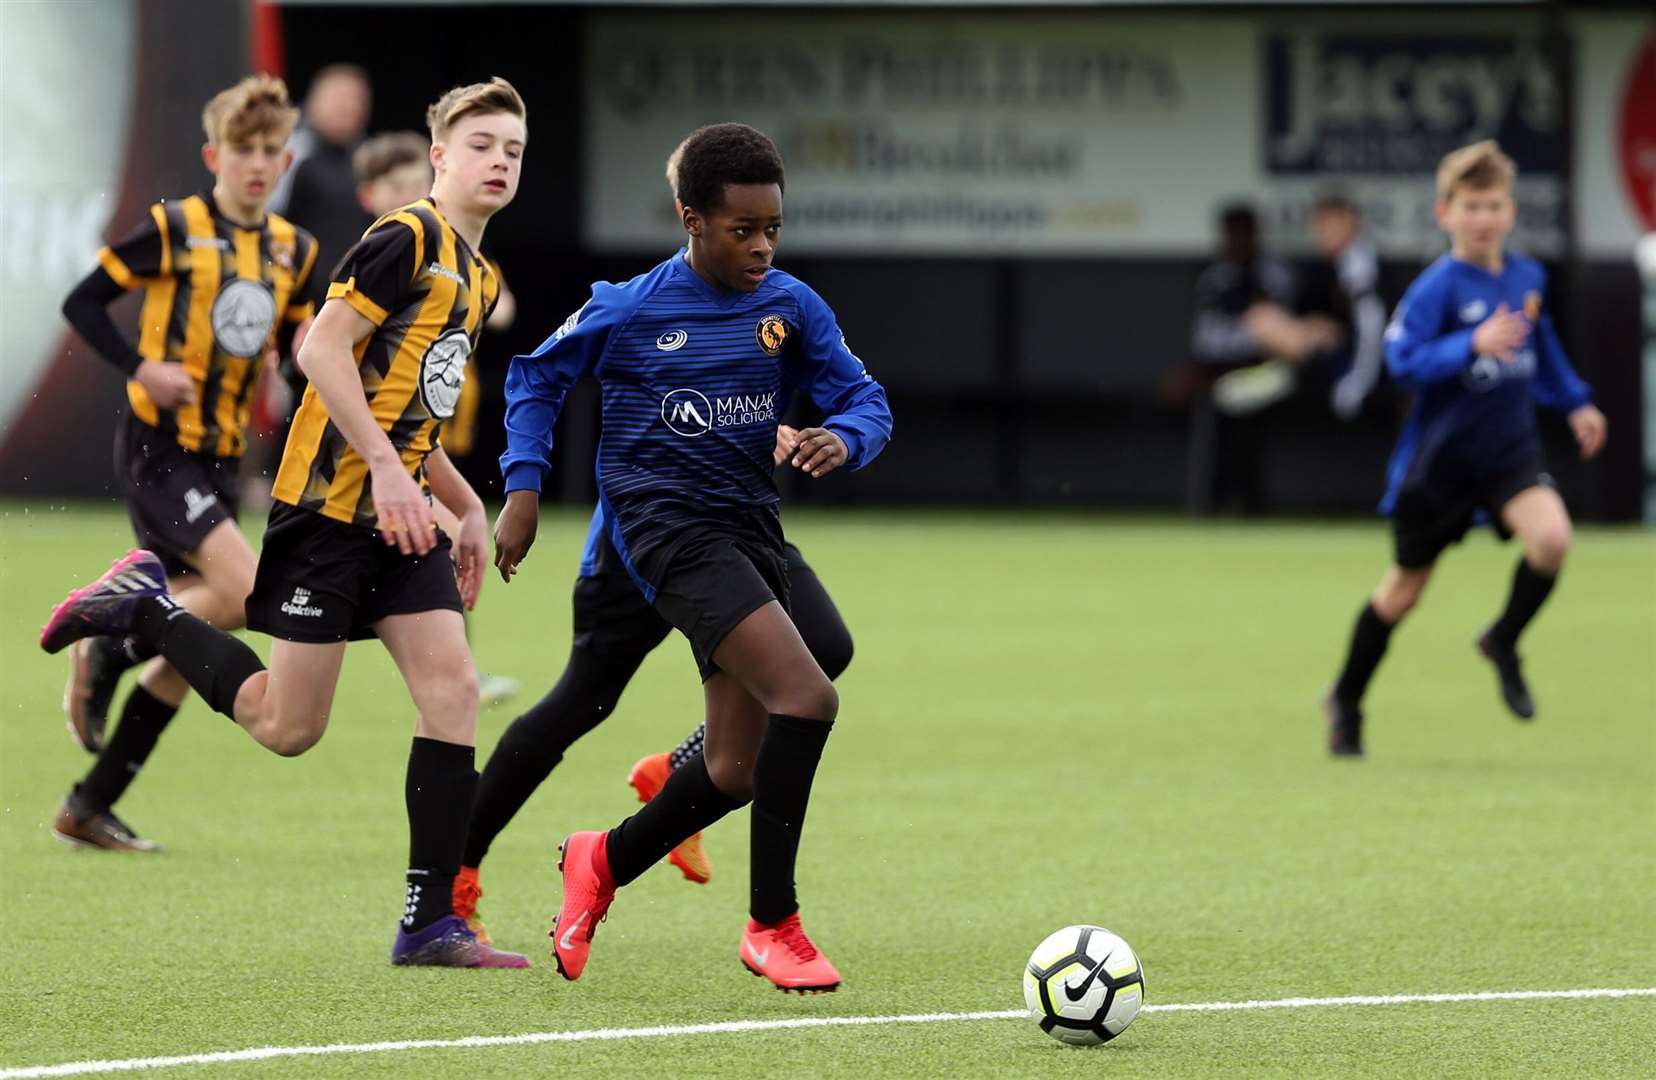 Orpington under-13s striker Richard Ojo races clear of the Folkestone Invicta defence. Picture: PSP Images